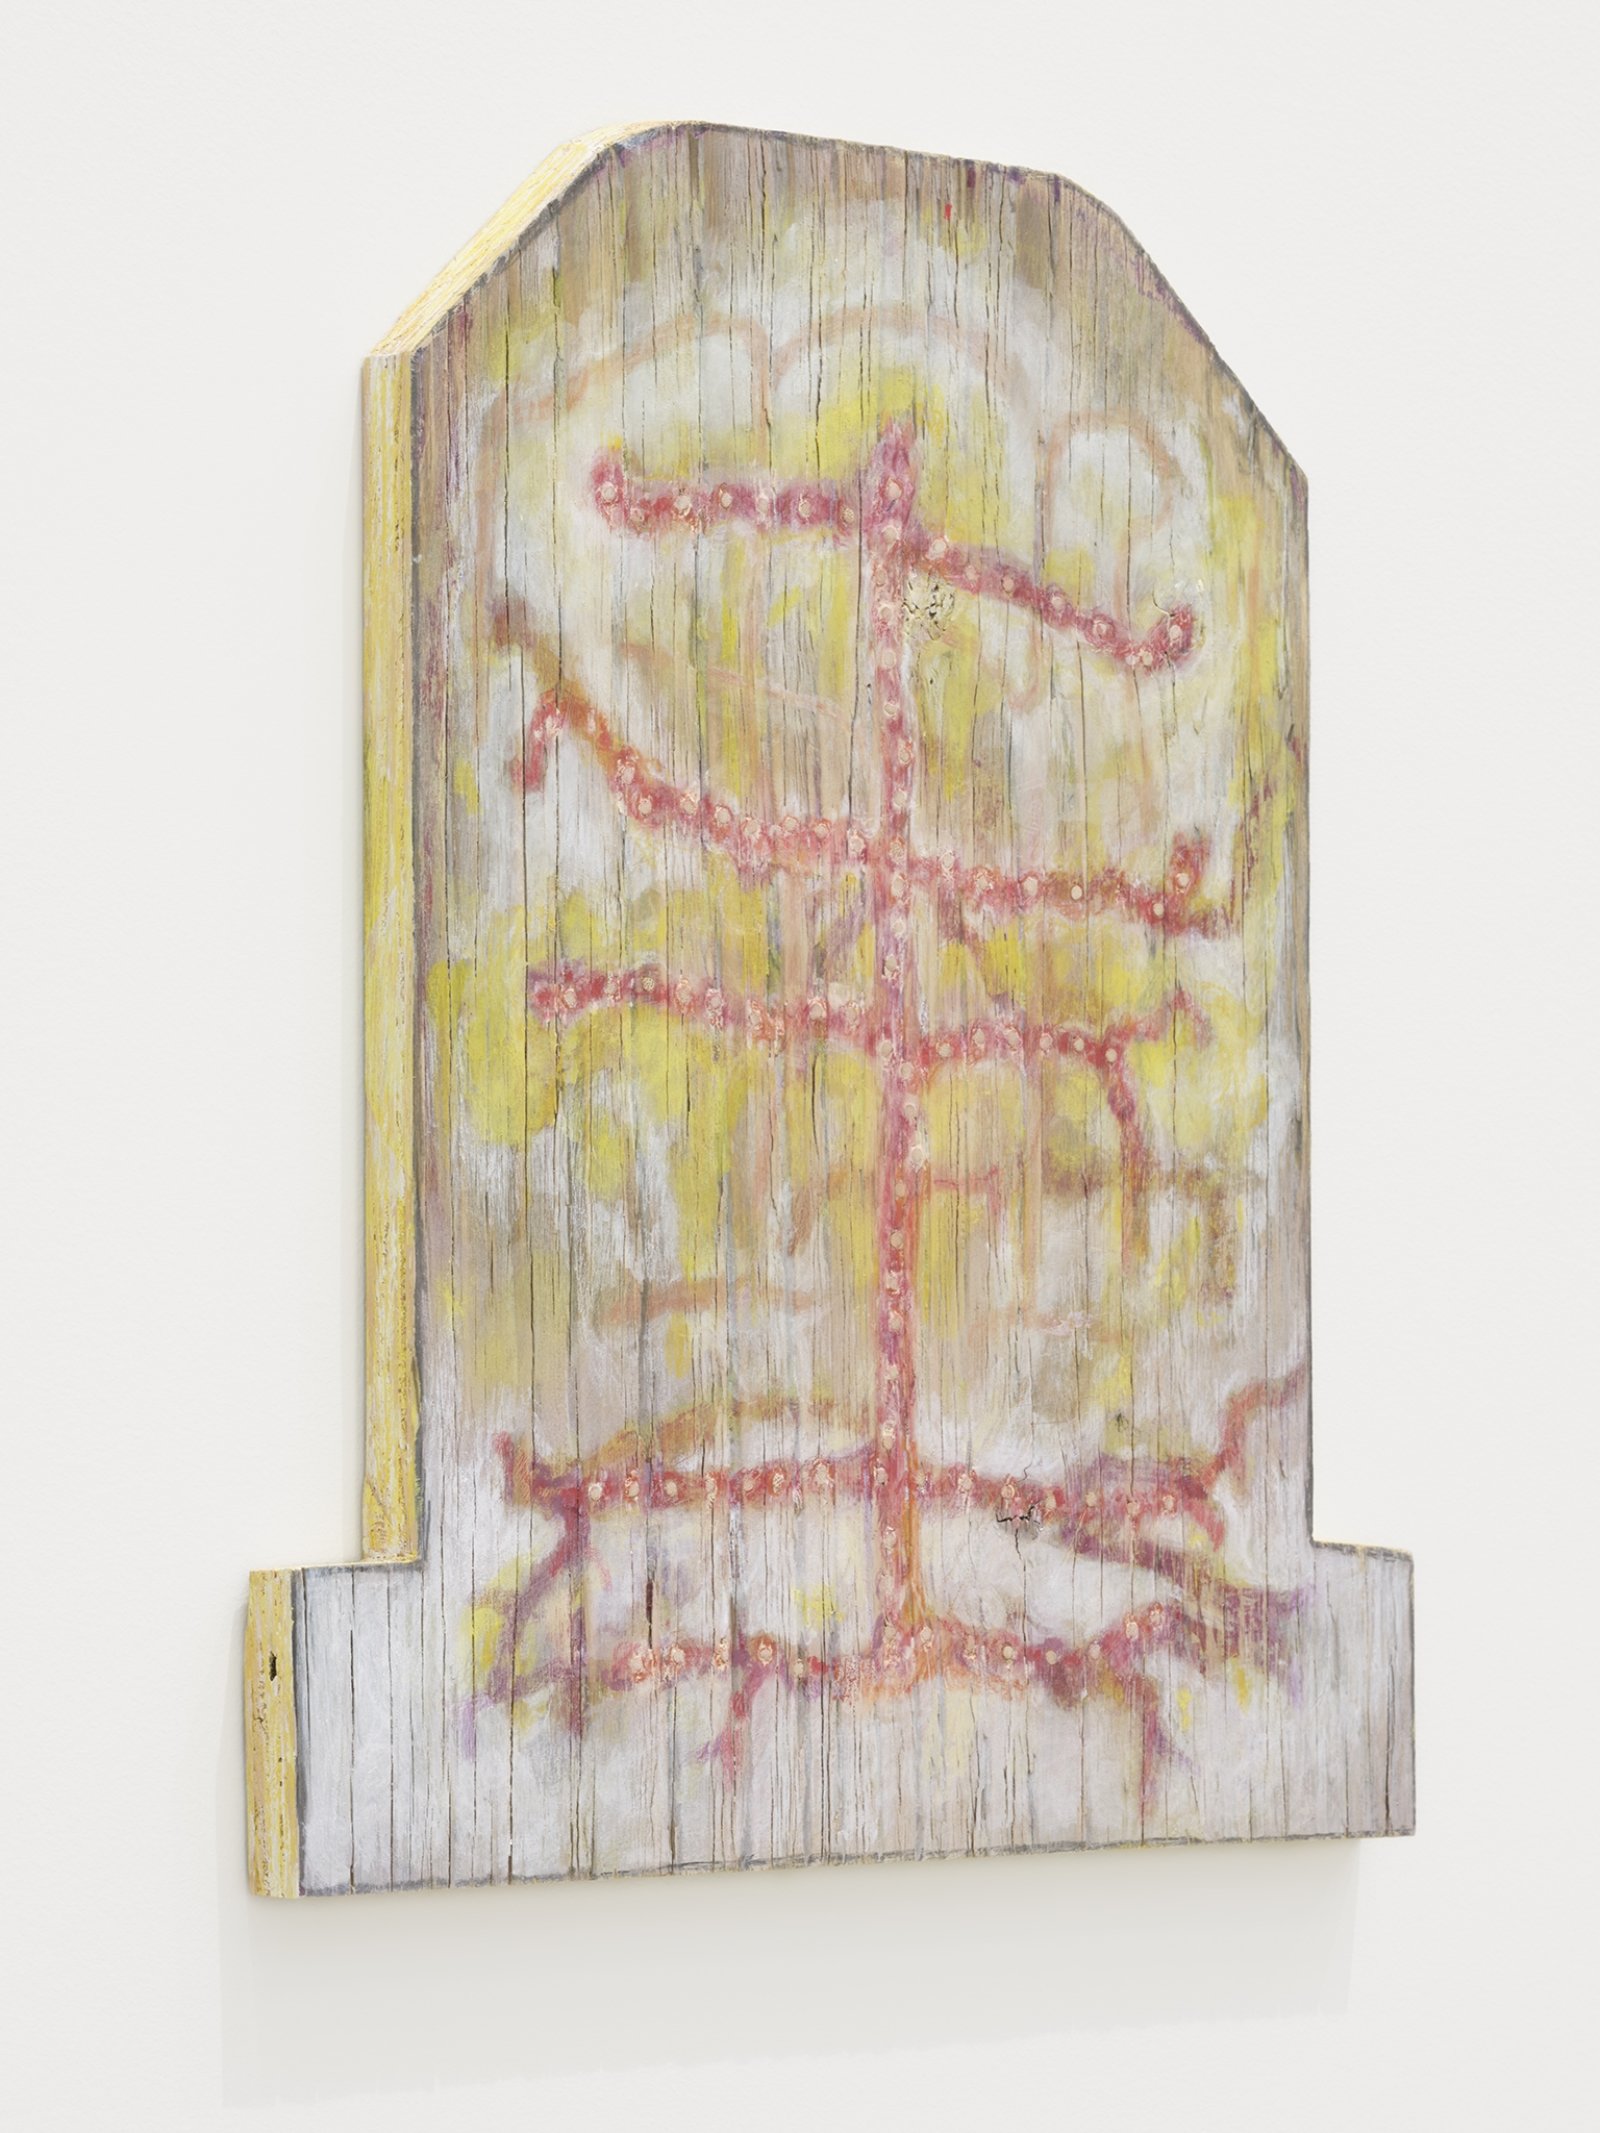 Ashes Withyman, One who likes shadow dance, 2019, found wood, paint, coloured pencil, wood filler, graphite, 15 x 13 in. (38 x 33 cm)